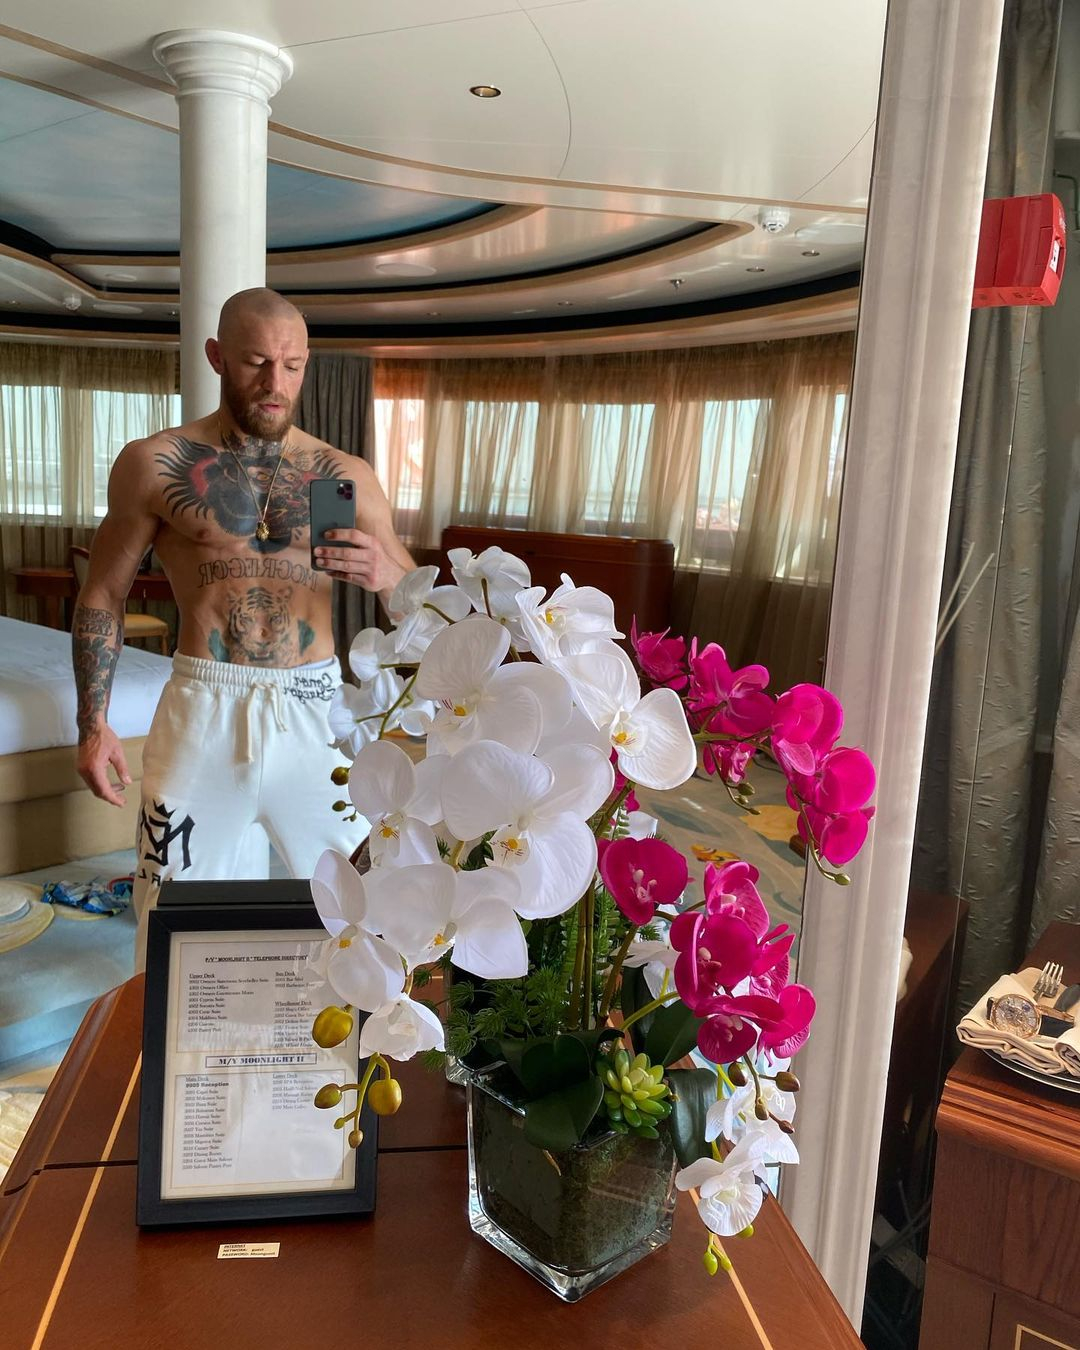 Conor McGregor's luxury yacht, which he took to Fight Island to see Dustin Poirier in the UFC 257 fight.